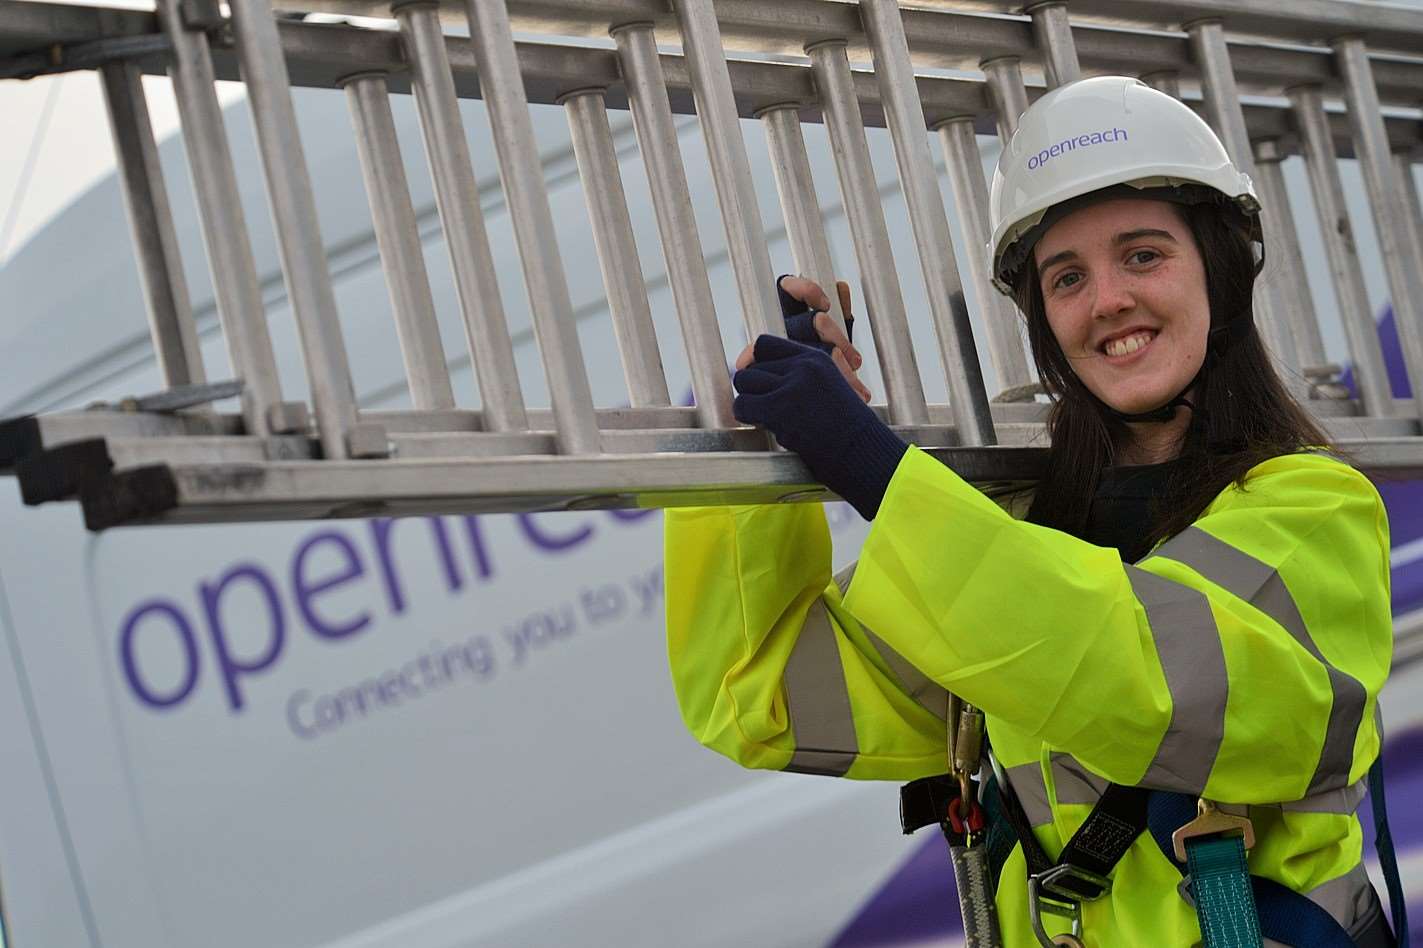 Openreach has launched an engineer recruitment drive